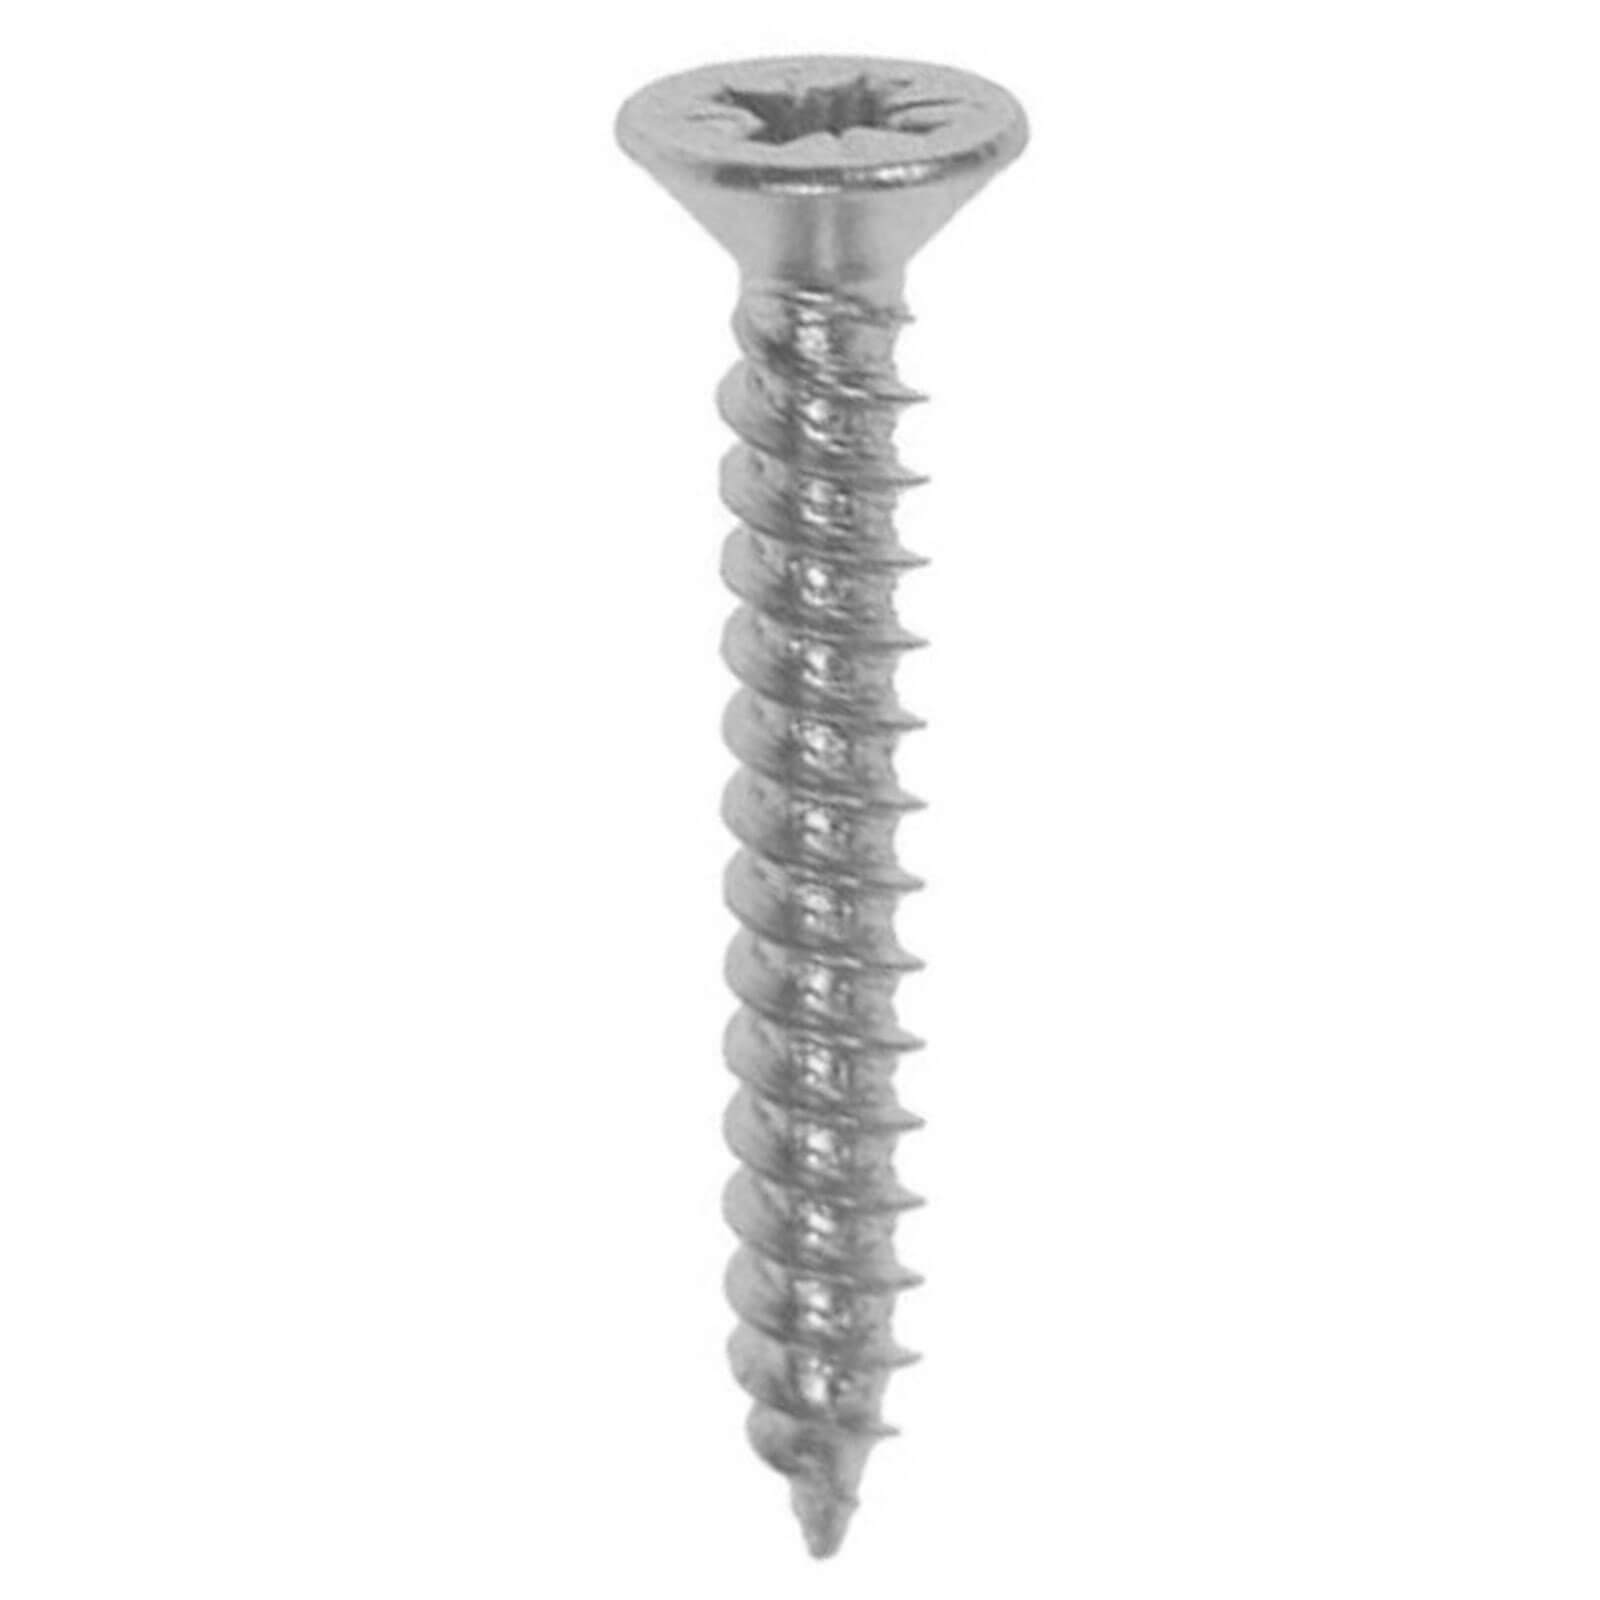 Photos - Nail / Screw / Fastener TIMCO Self Tapping Countersunk Pozi Screws 4.5mm 30mm Pack of 16 08114CCAZP 